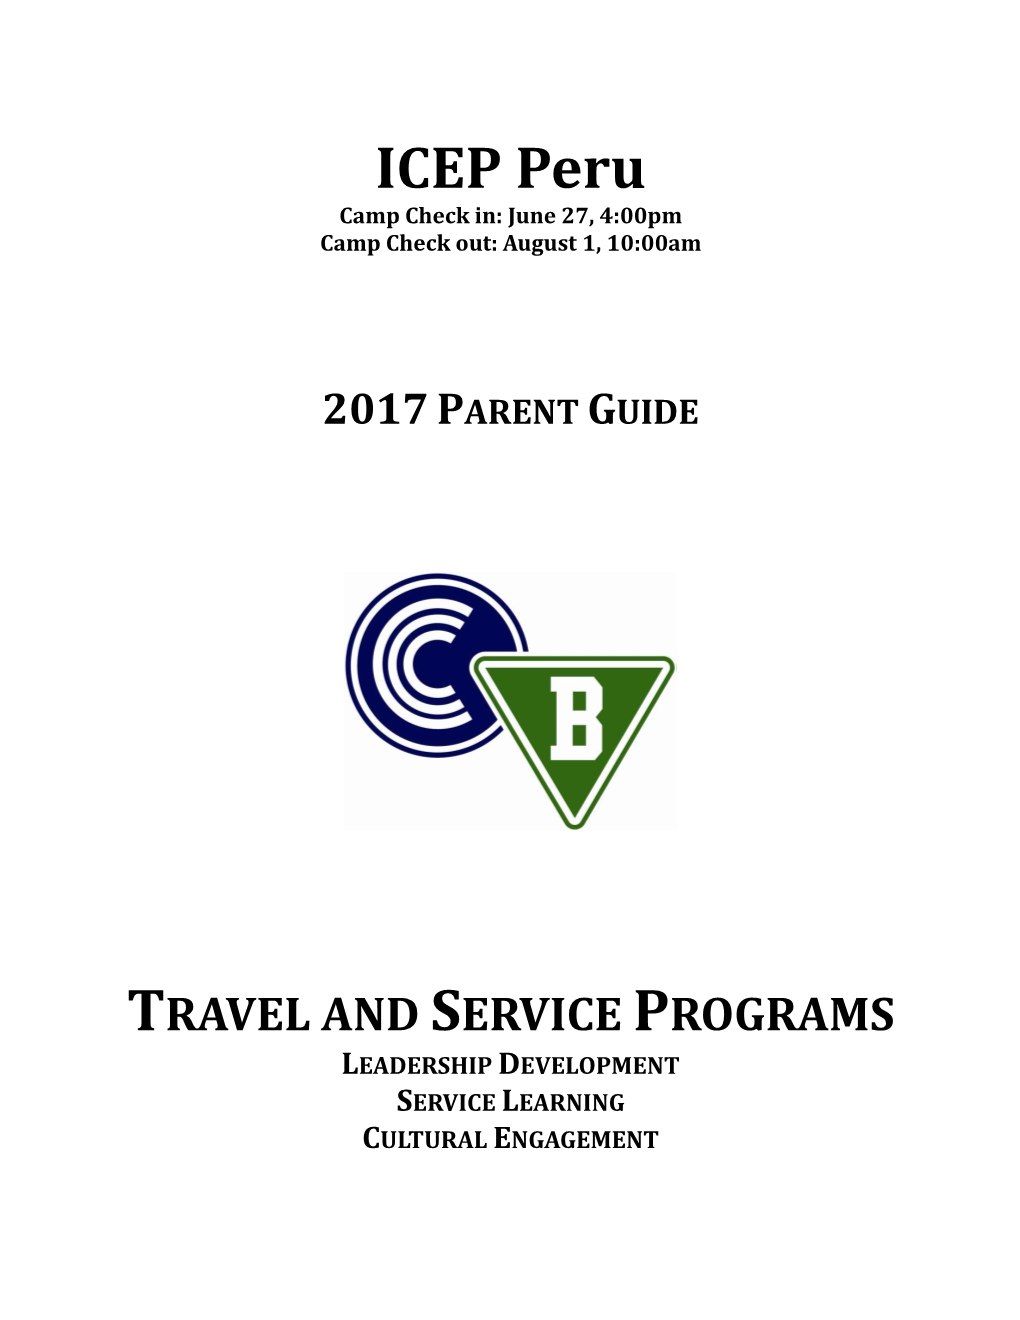 ICEP Peru Camp Check In: June 27, 4:00Pm Camp Check Out: August 1, 10:00Am